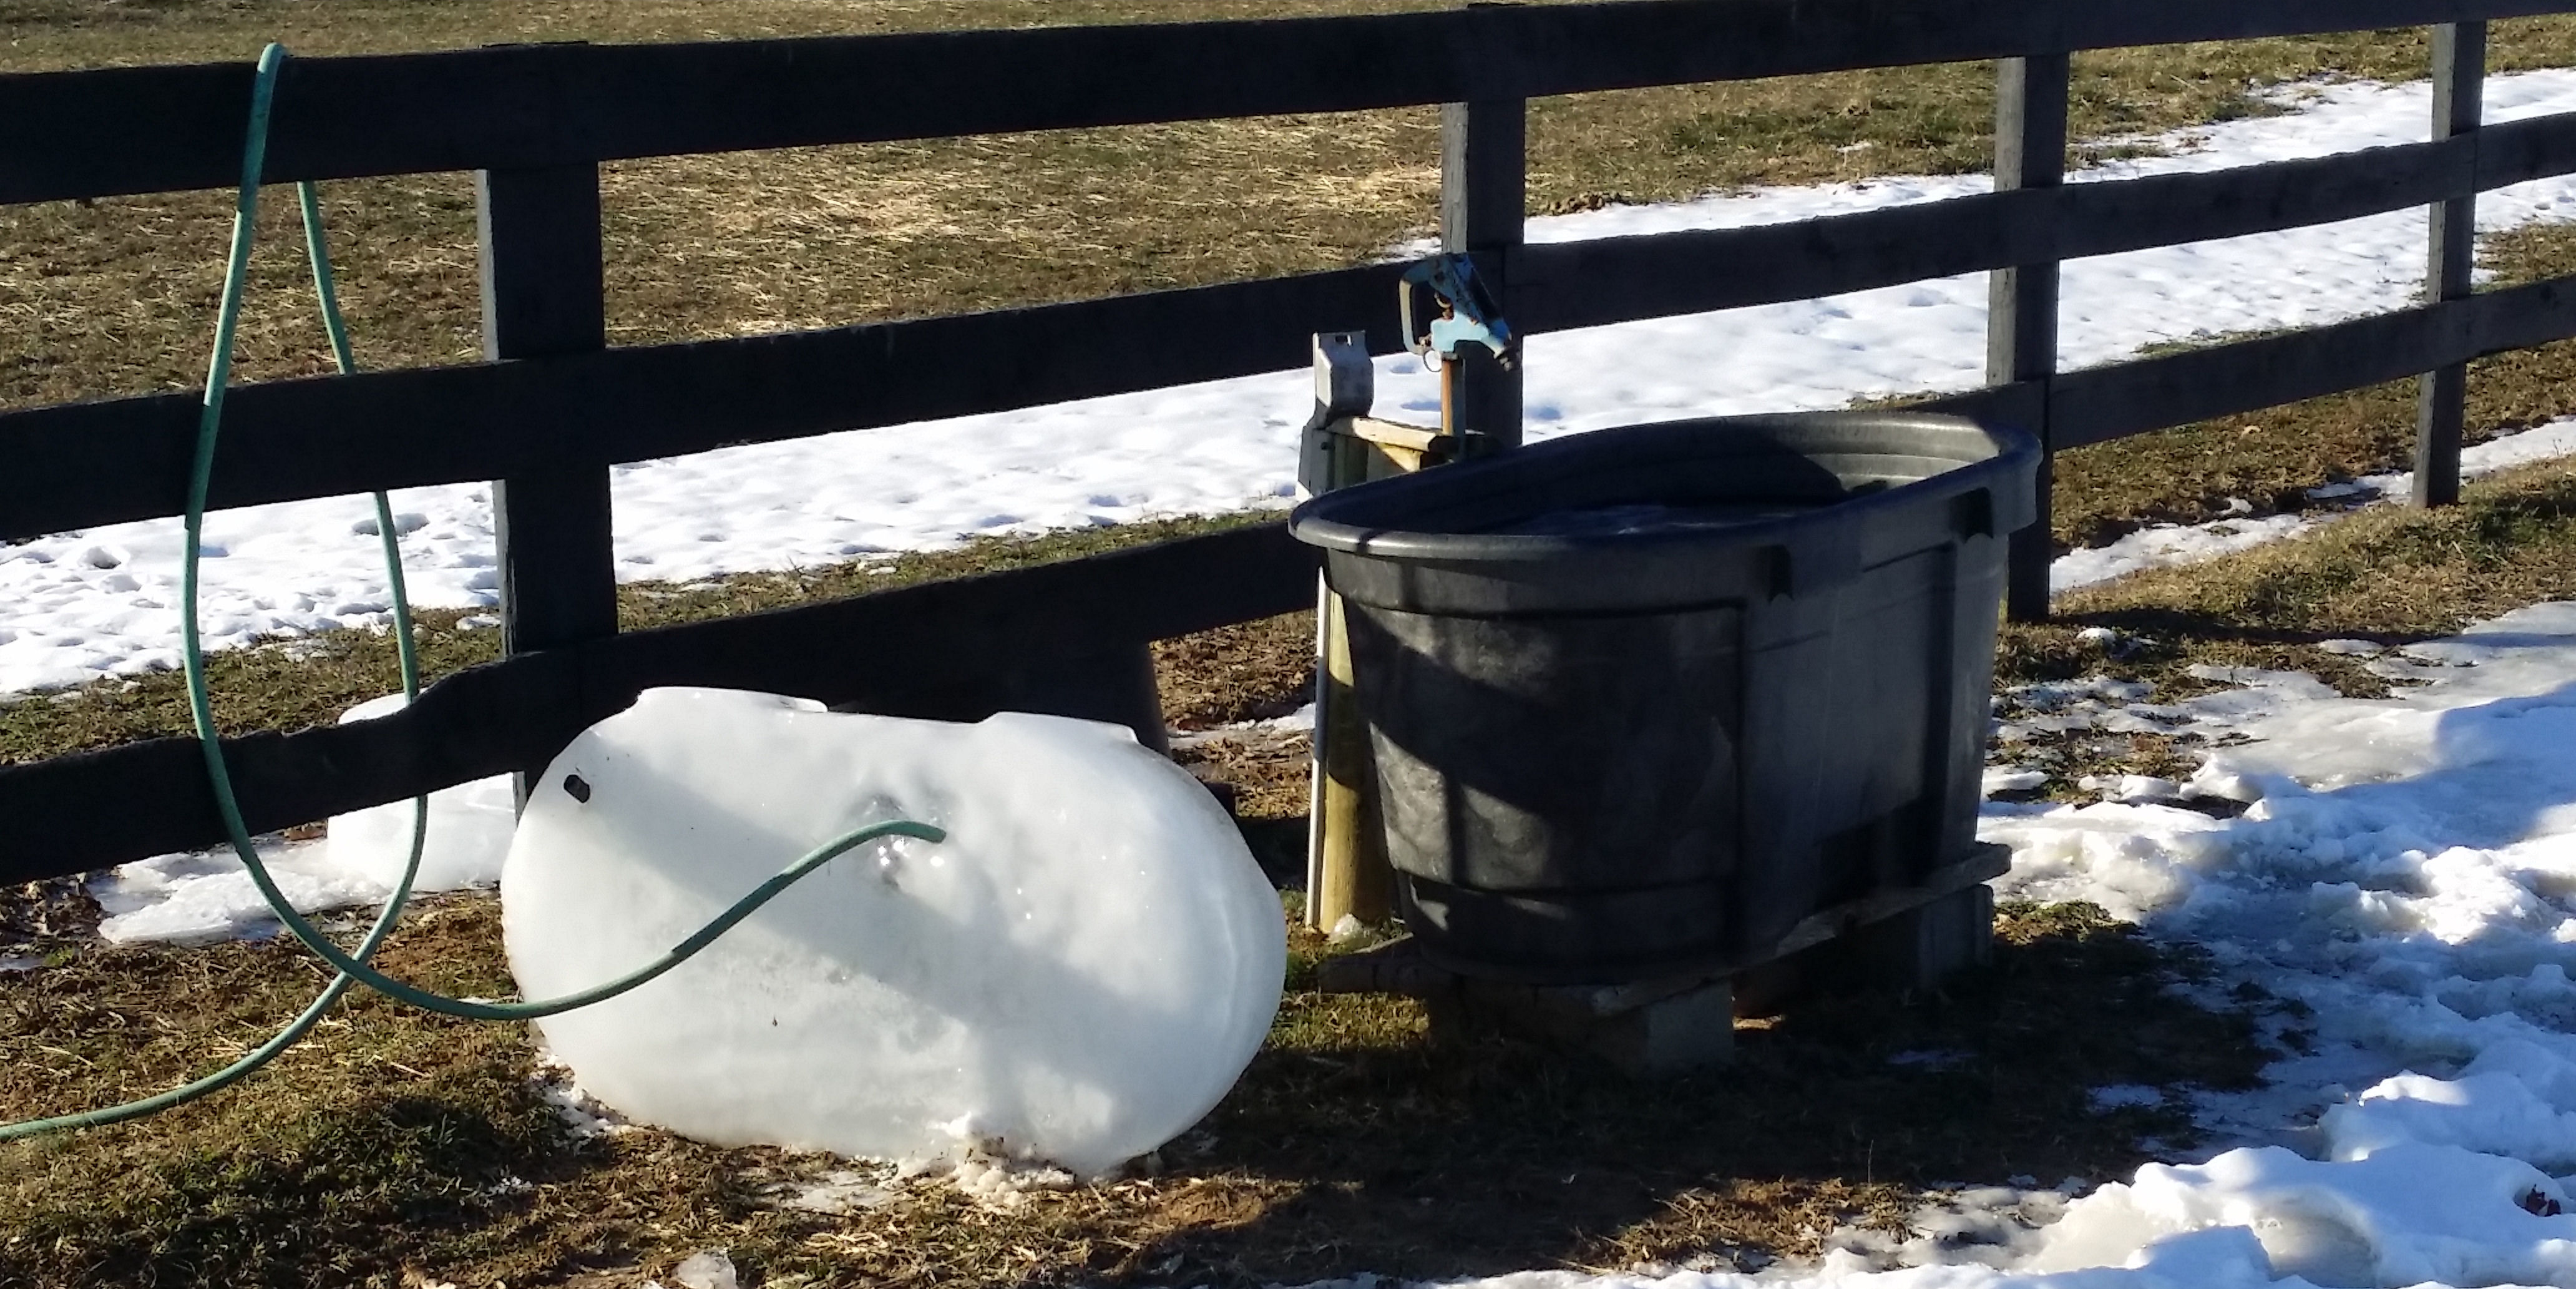 An ice block removed from a water trough.